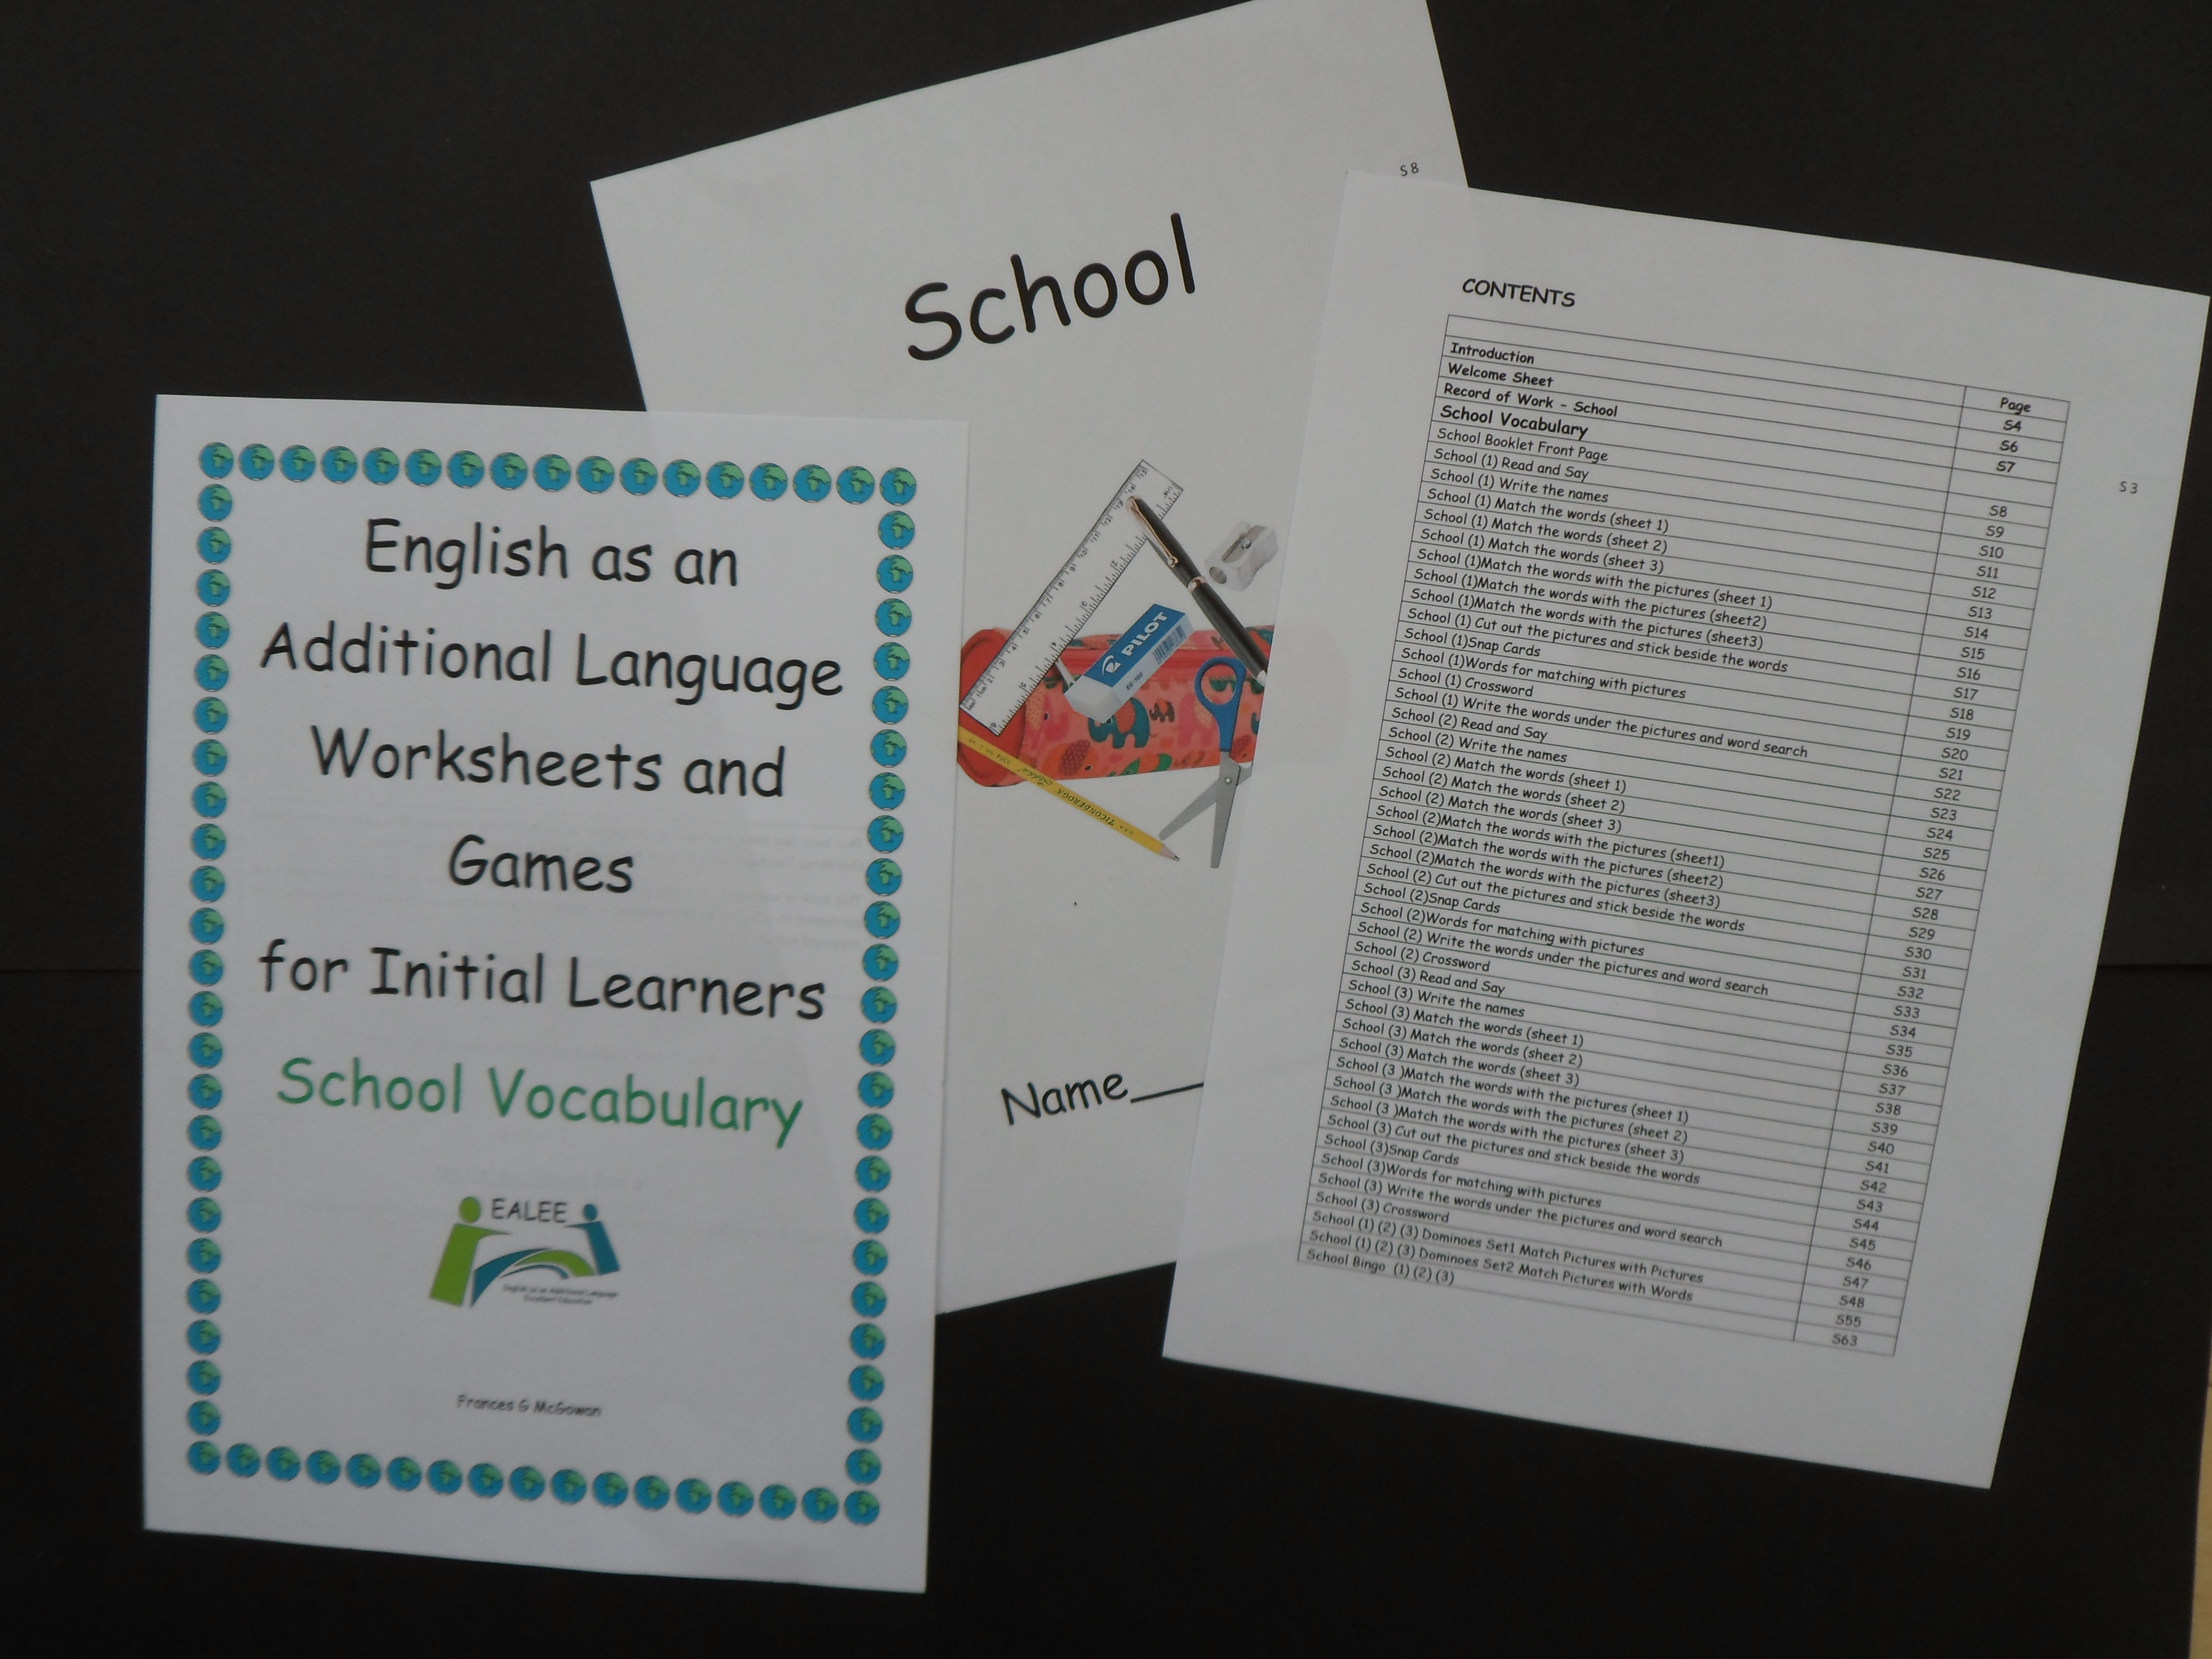 EAL/ESL worksheets and games for Initial Learners School Vocabulary